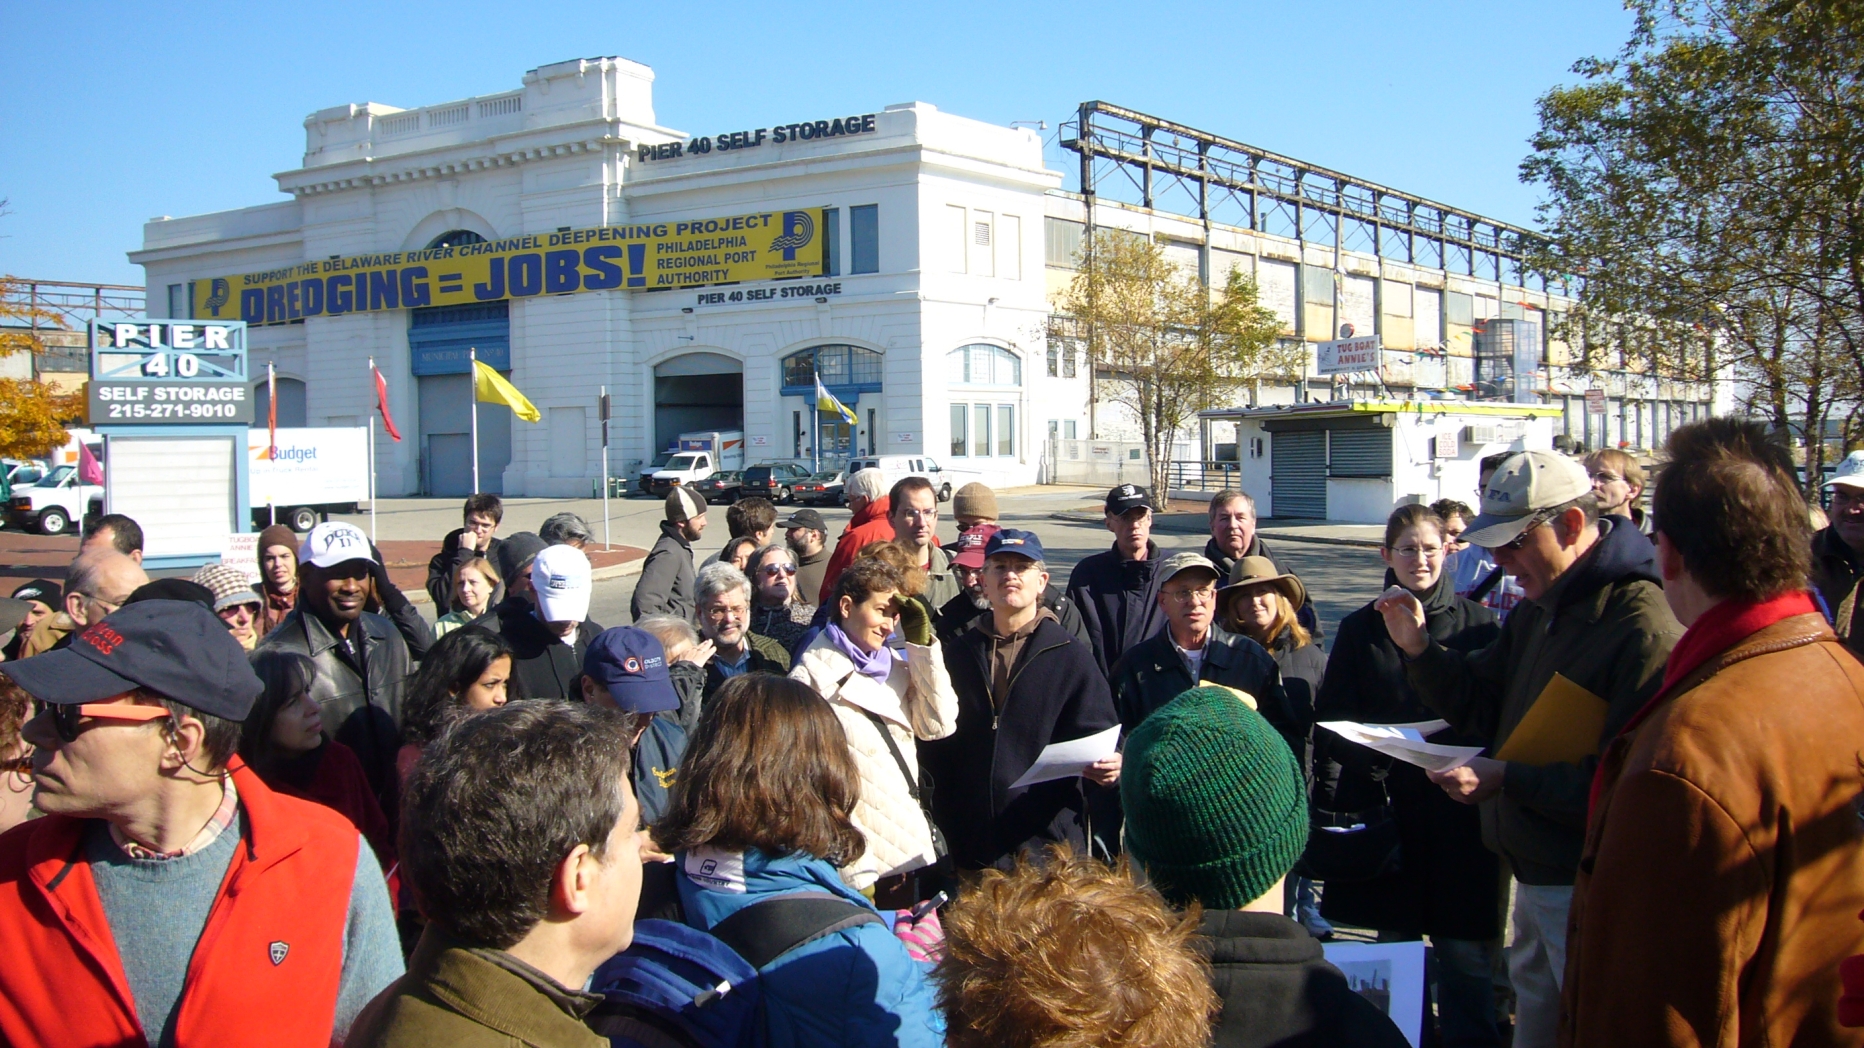 Group participating in the Central Delaware riverfront planning process gathers on a street corner and listens to an event organizer read from a document on a clipboard.